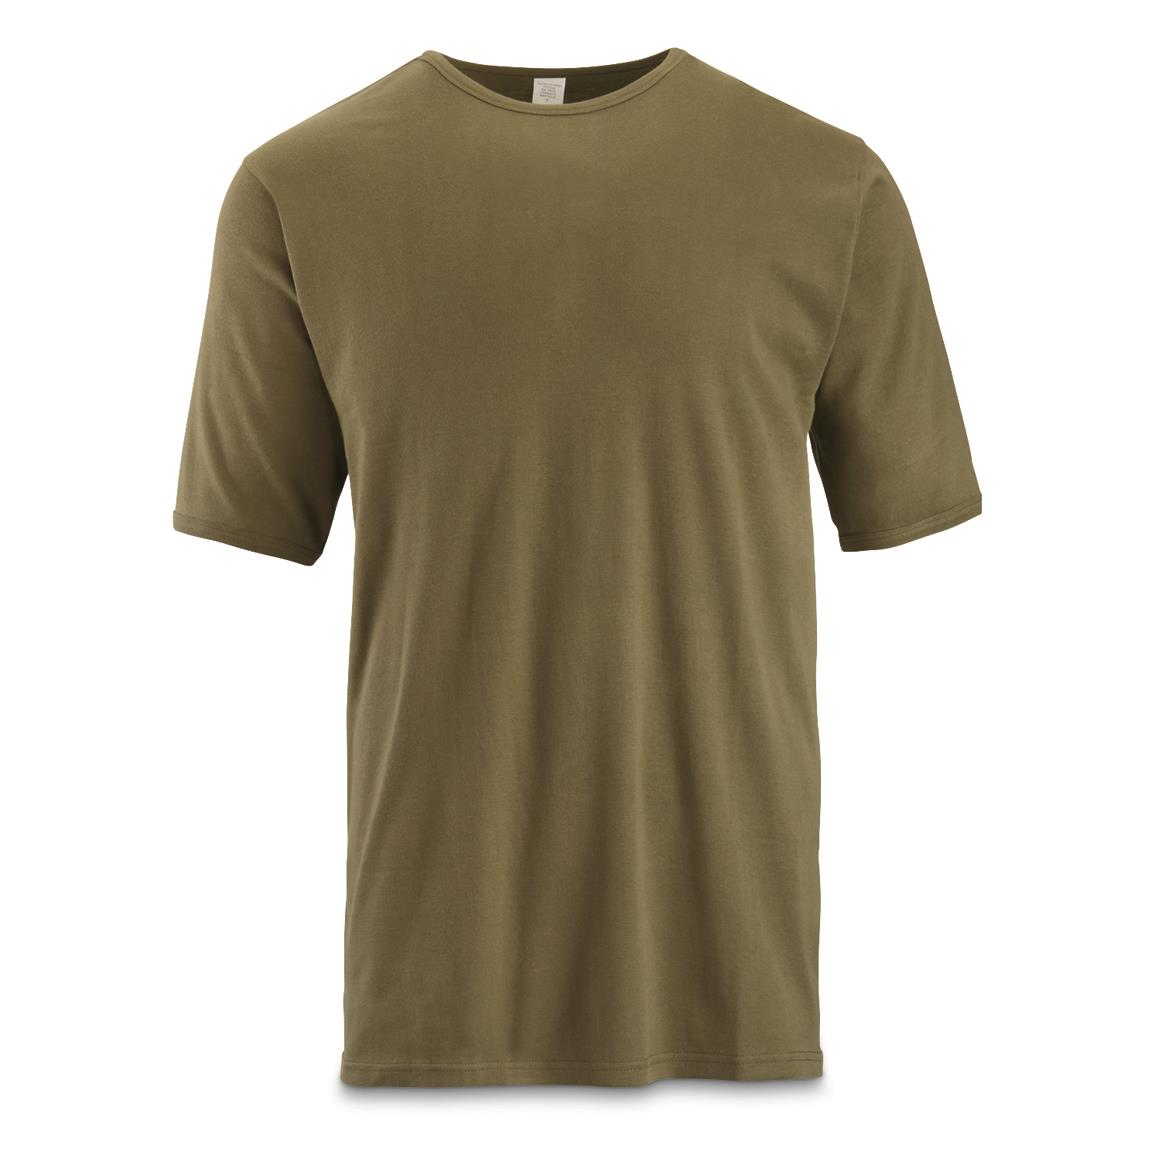 Belgian Military Surplus Cotton T-Shirts, 2 Pack, Like New, Olive Drab